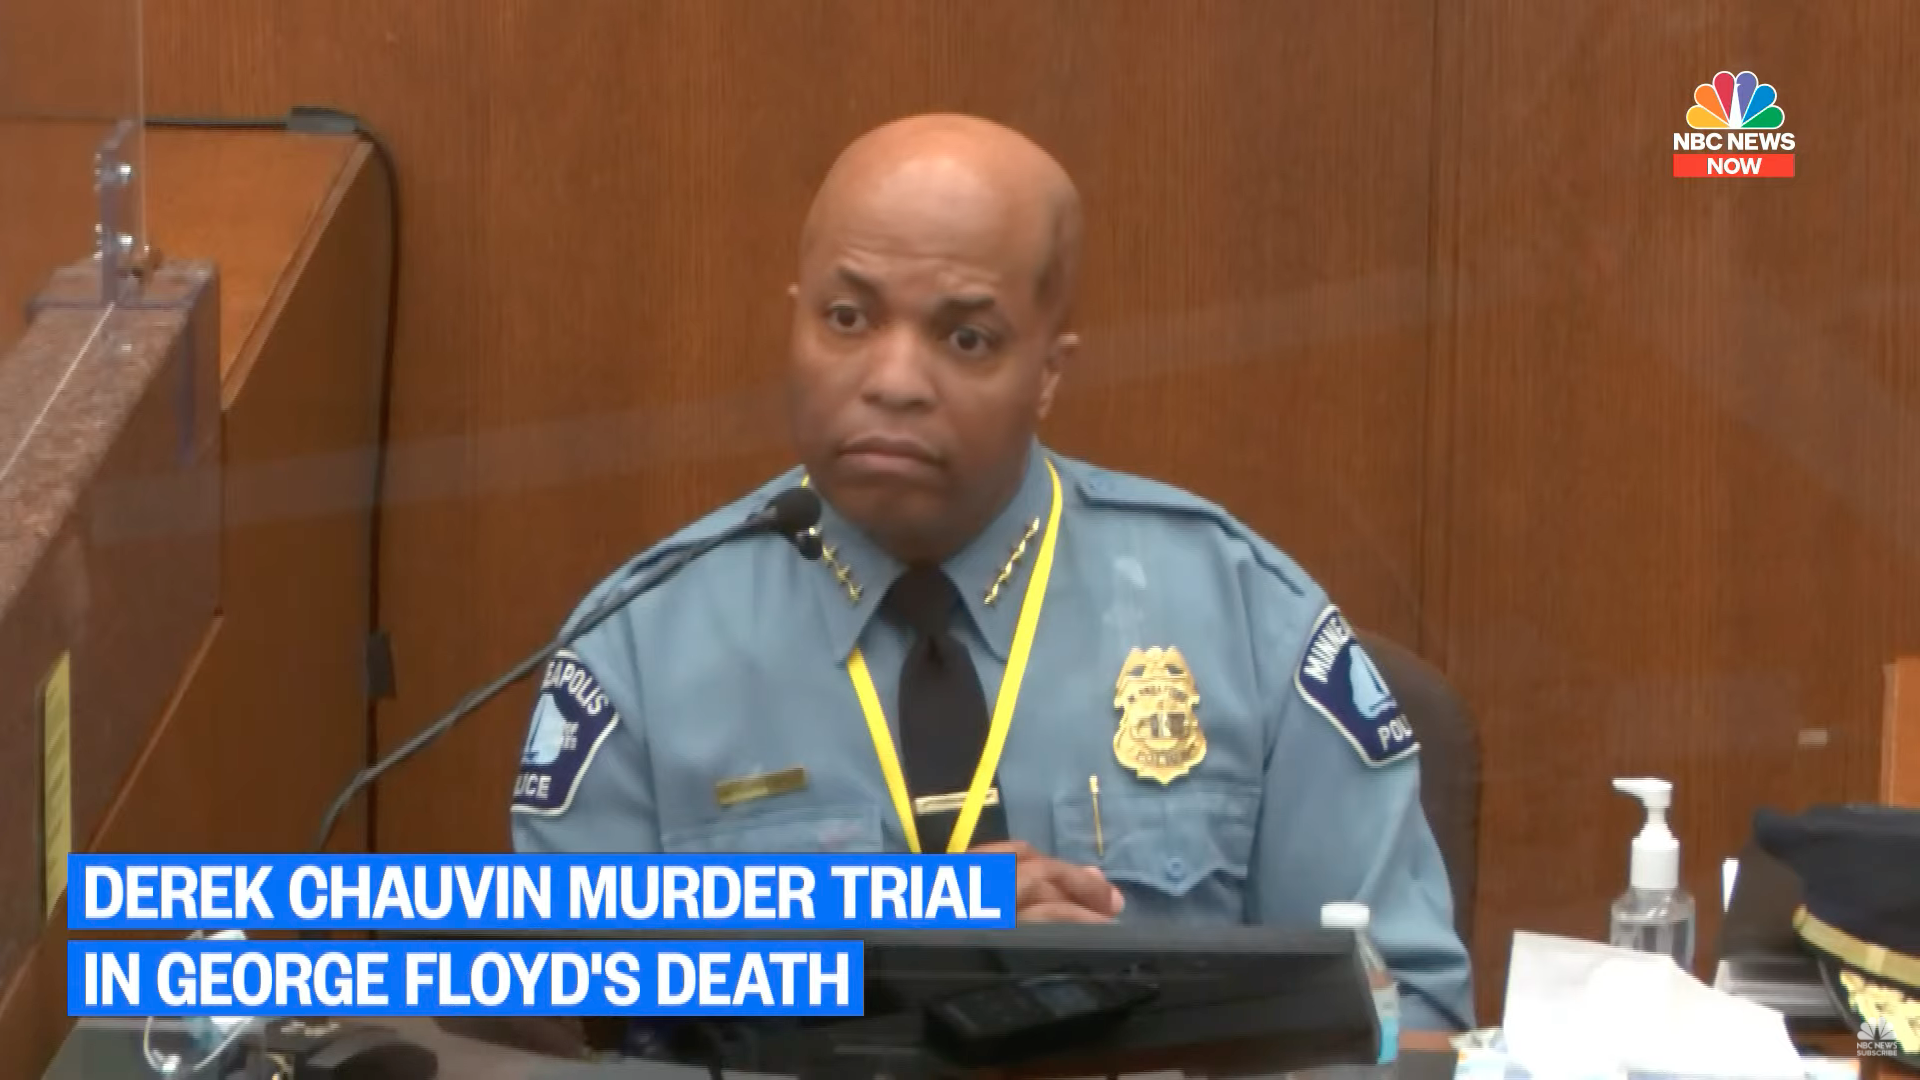 Screenshot of an NBC News channel broadcasting the Derek Chauvin trial, which shows the police chief sitting as he's being questioned